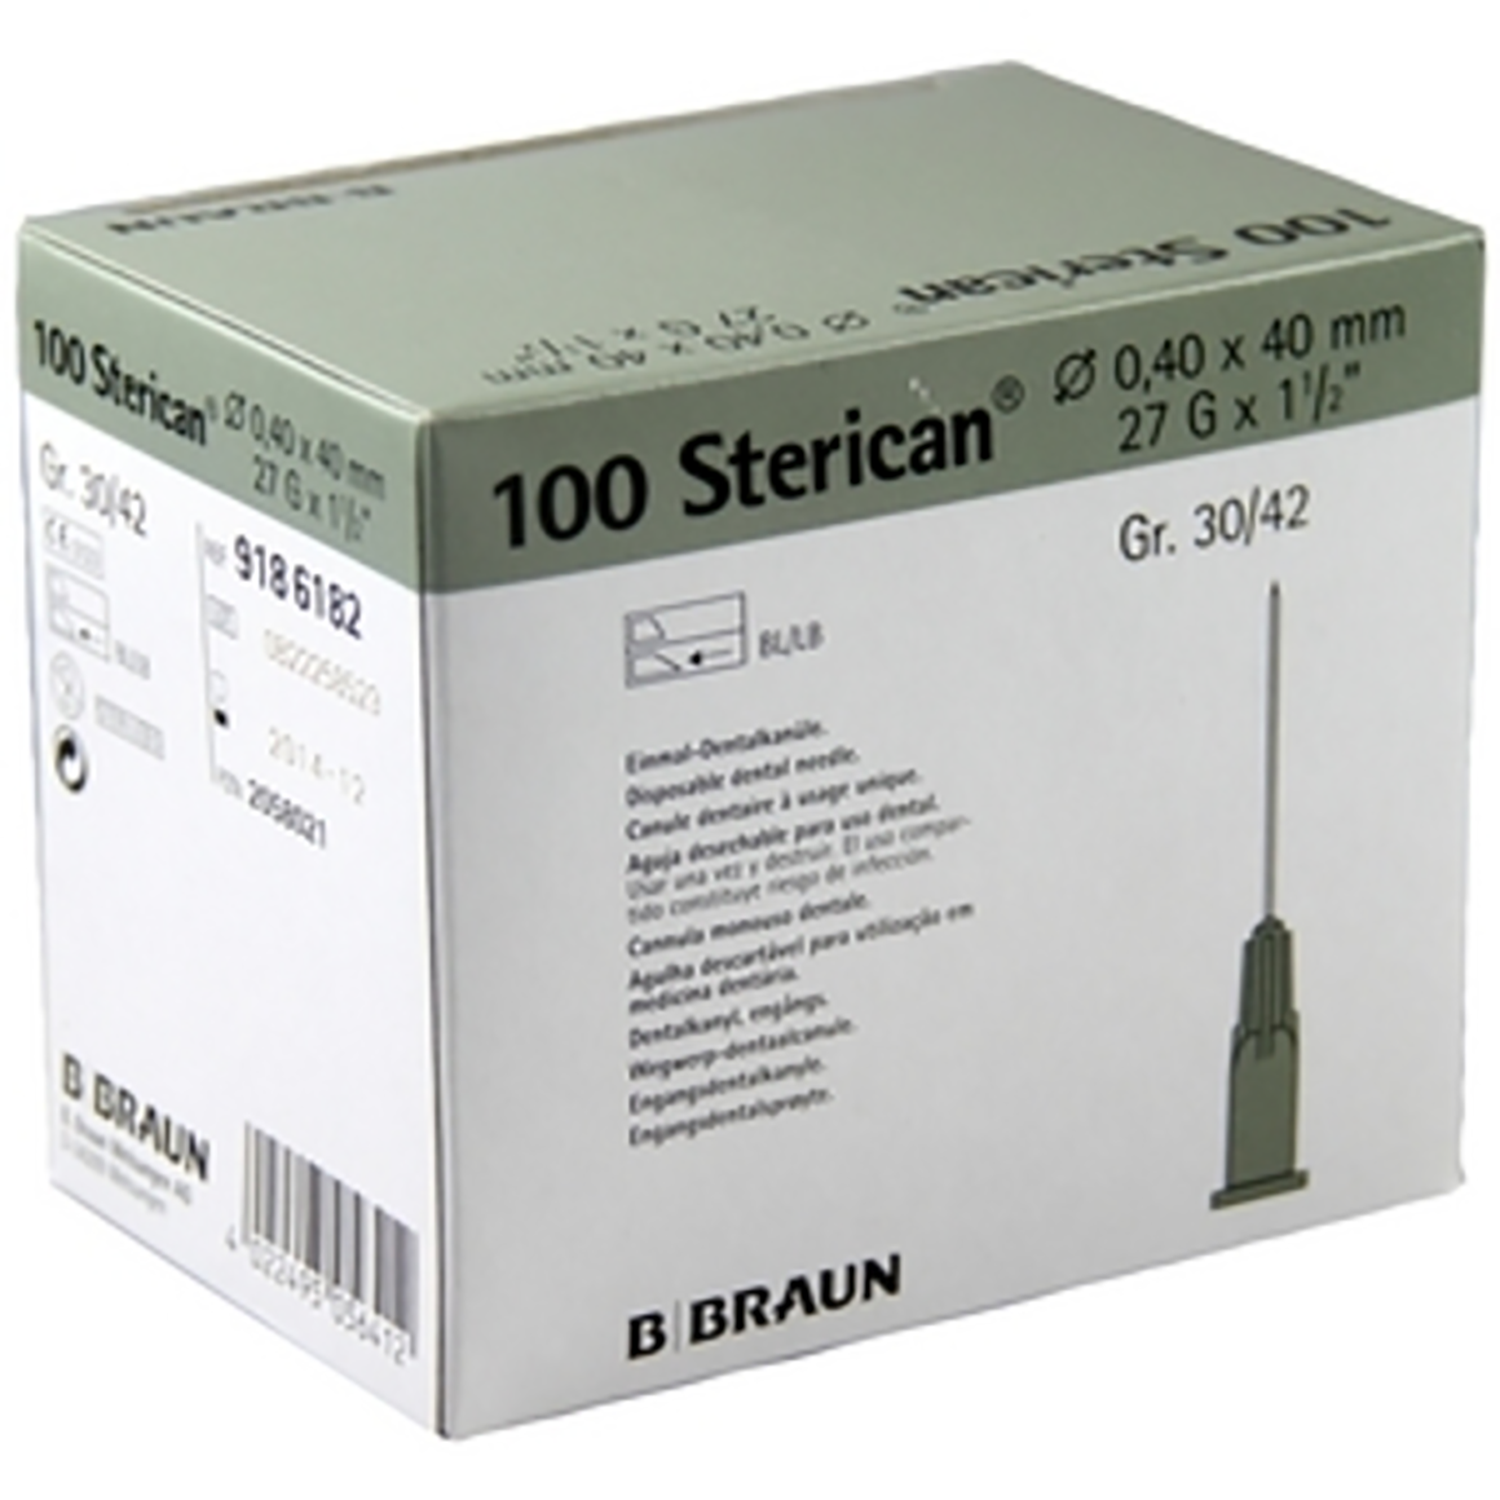 Braun Sterican Hypodermic Needles | 27G x 1 1/2 Grey | Pack of 100 (1)